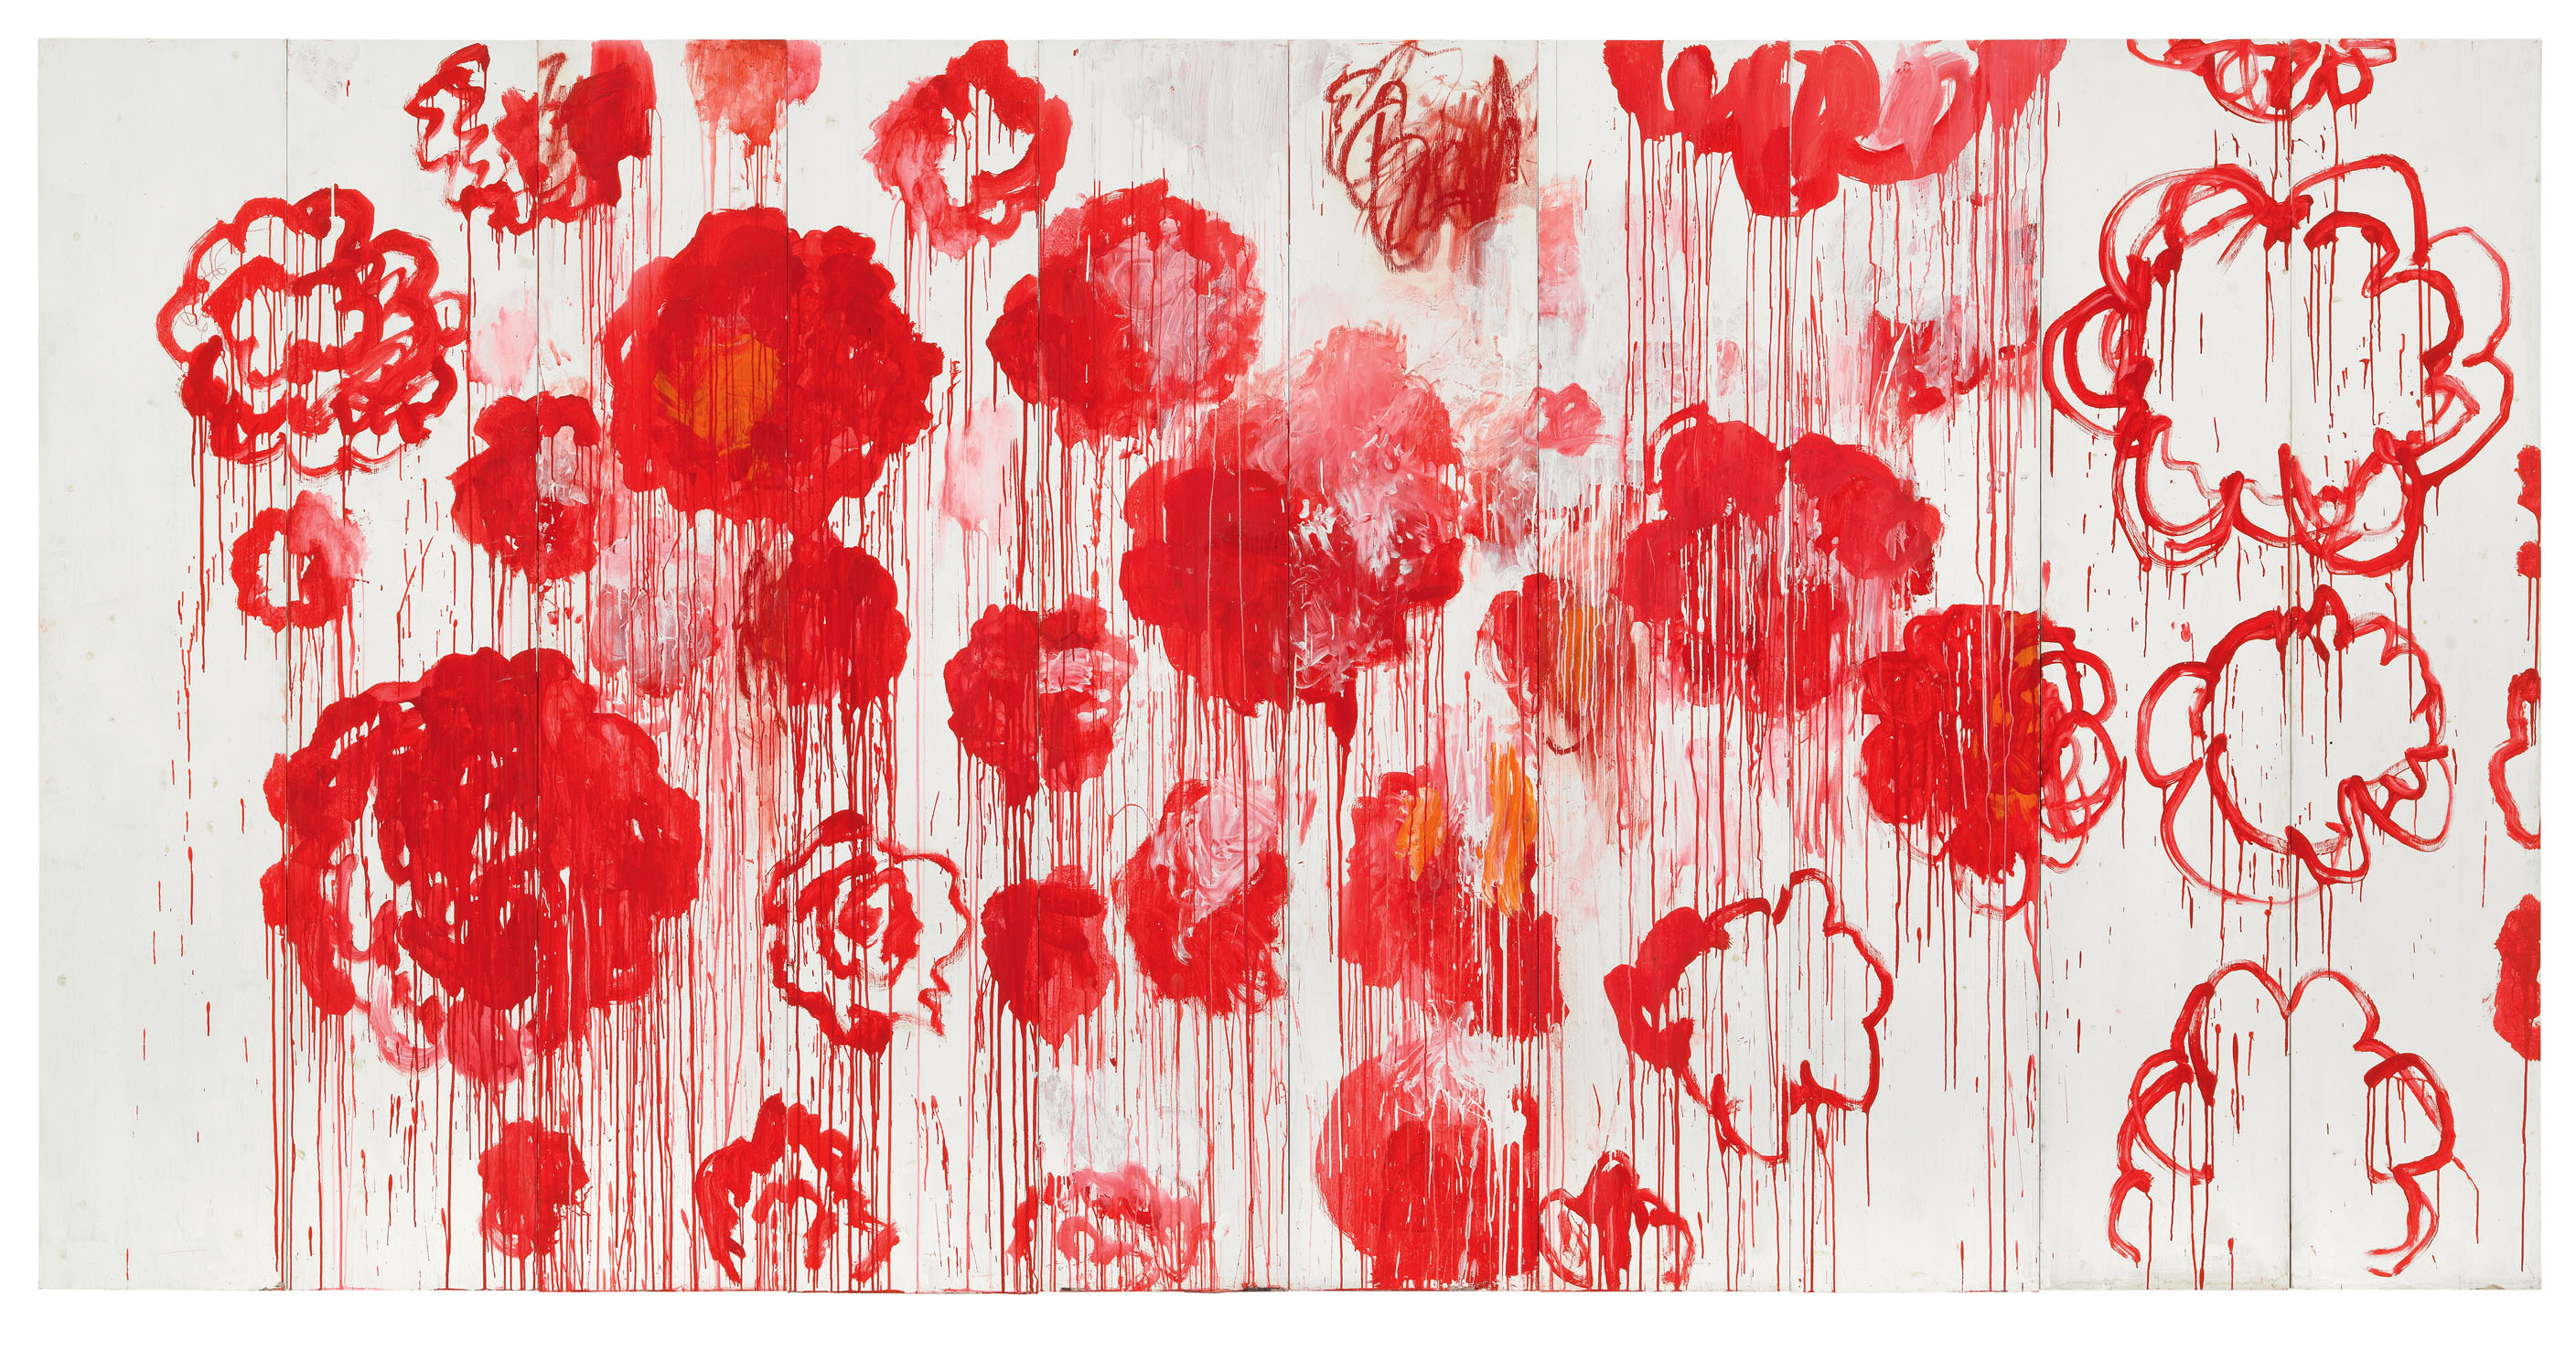 Cy Twombly (American, 1928-2011) 'Blooming' 2001-2008